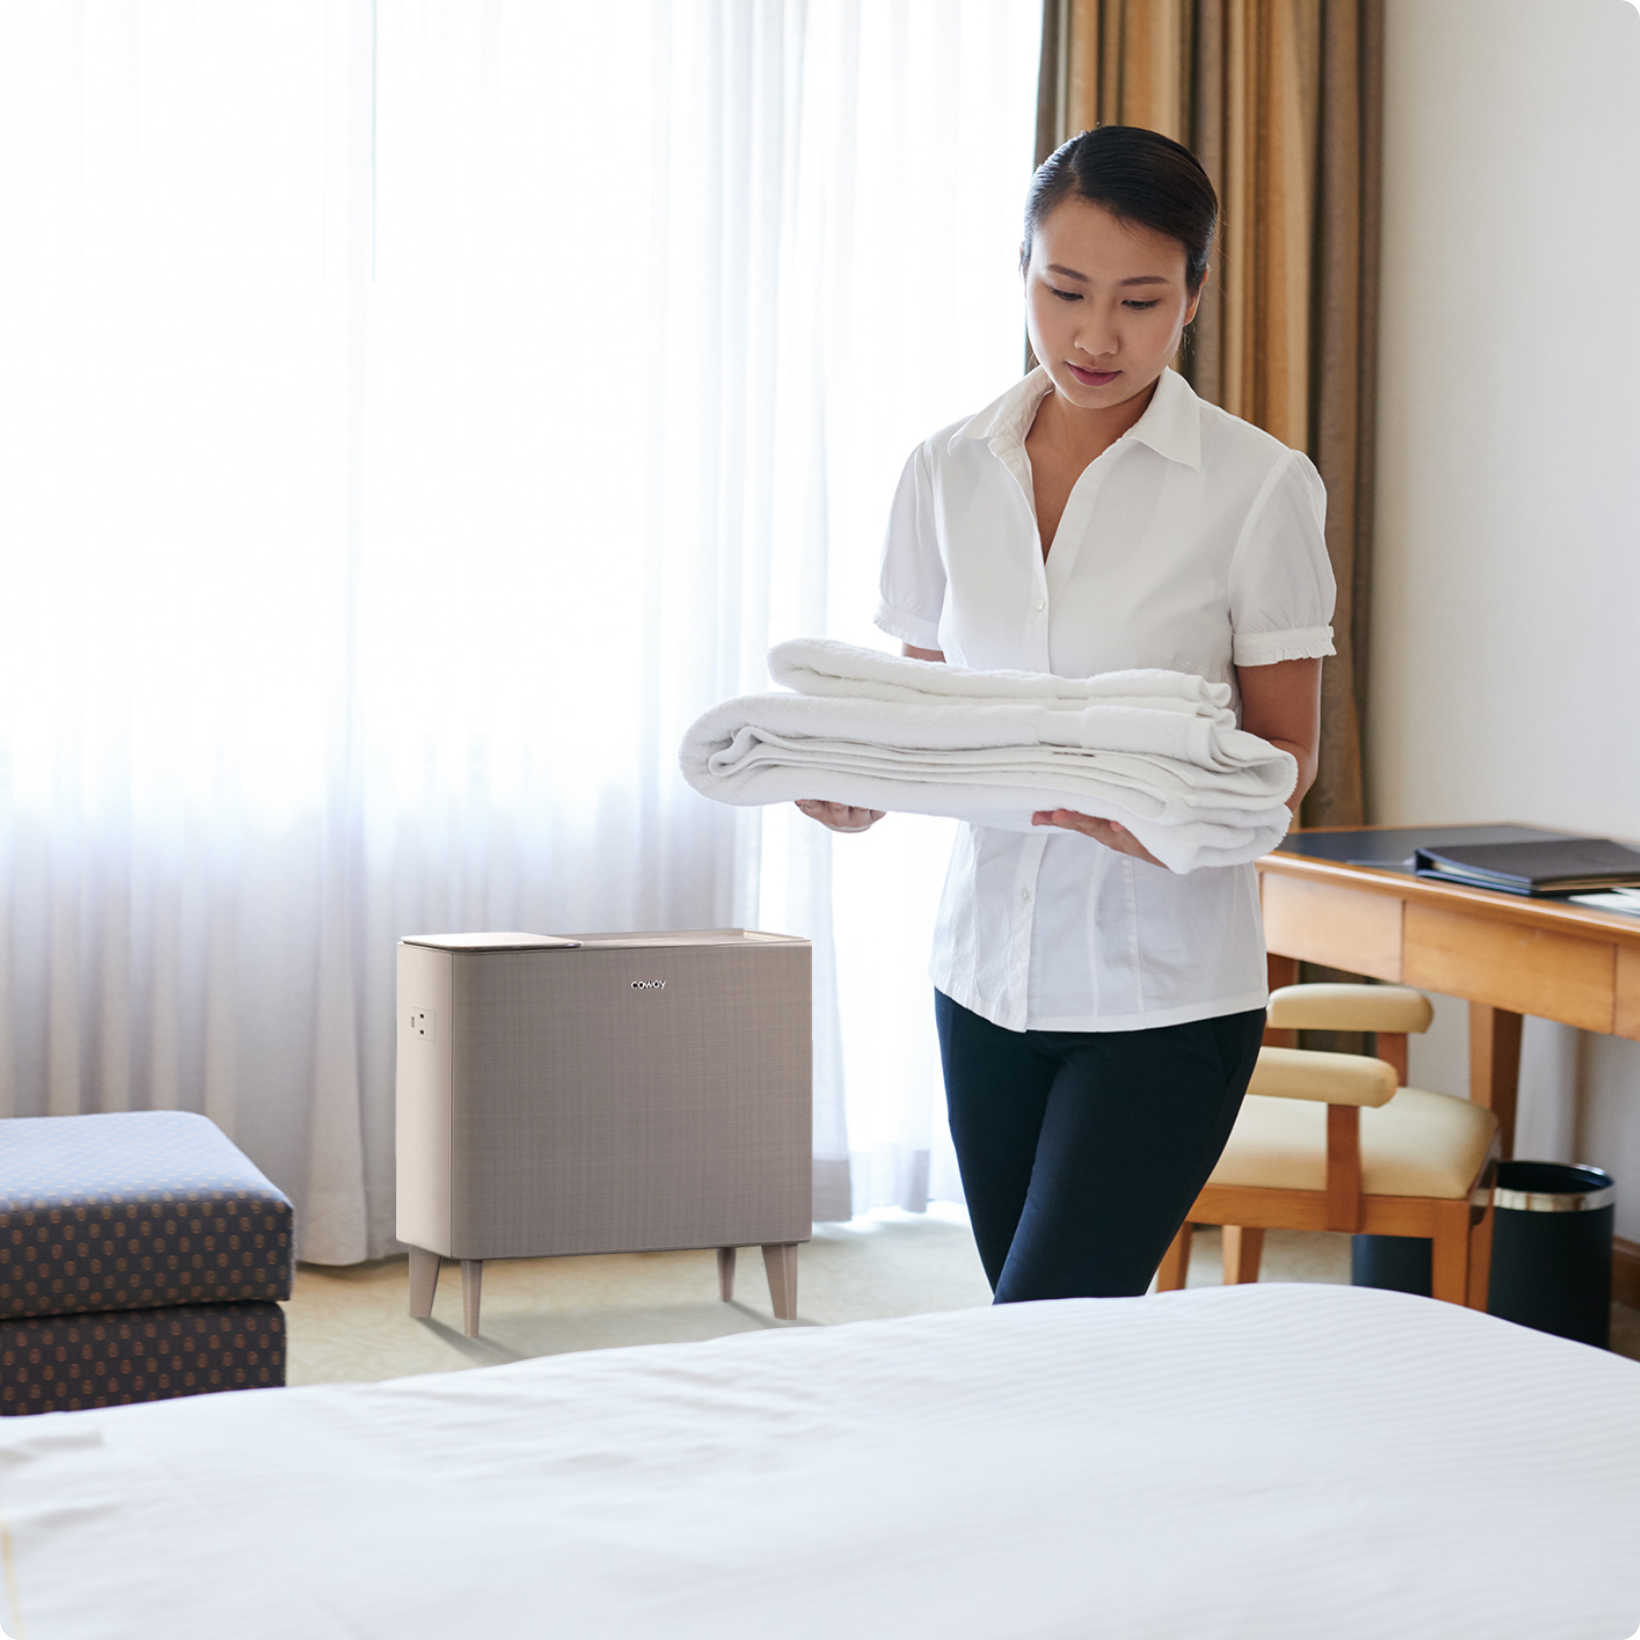 Housekeeper delivering fresh sheets to hotel room with Airmega air purifier